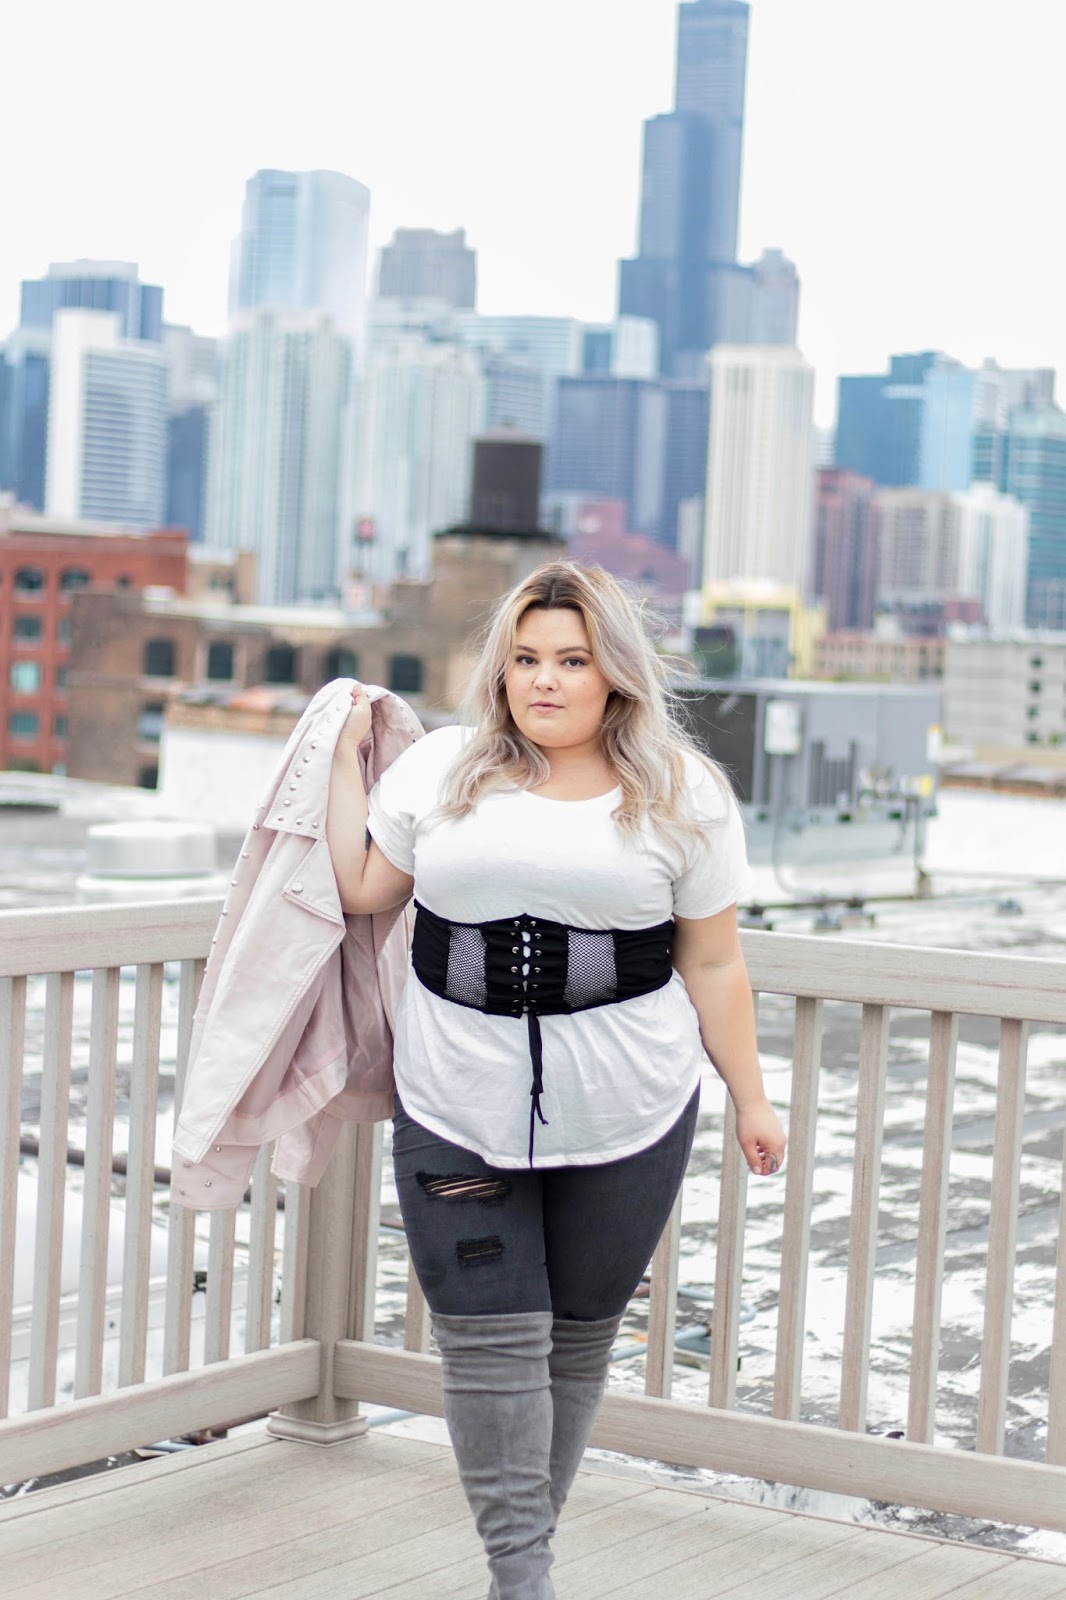 natalie in the city, natalie Craig, plus size fashion blogger, Chicago plus size fashion blogger, body positive, Charlotte Russe, affordable plus size clothes, wide calf knee high boots, wide boots, plus size boots, wide calf, curves and confidence, refinery 29, the 67 percent project, plus size dating, Chicago, Chicago fashion, Chicago skyline